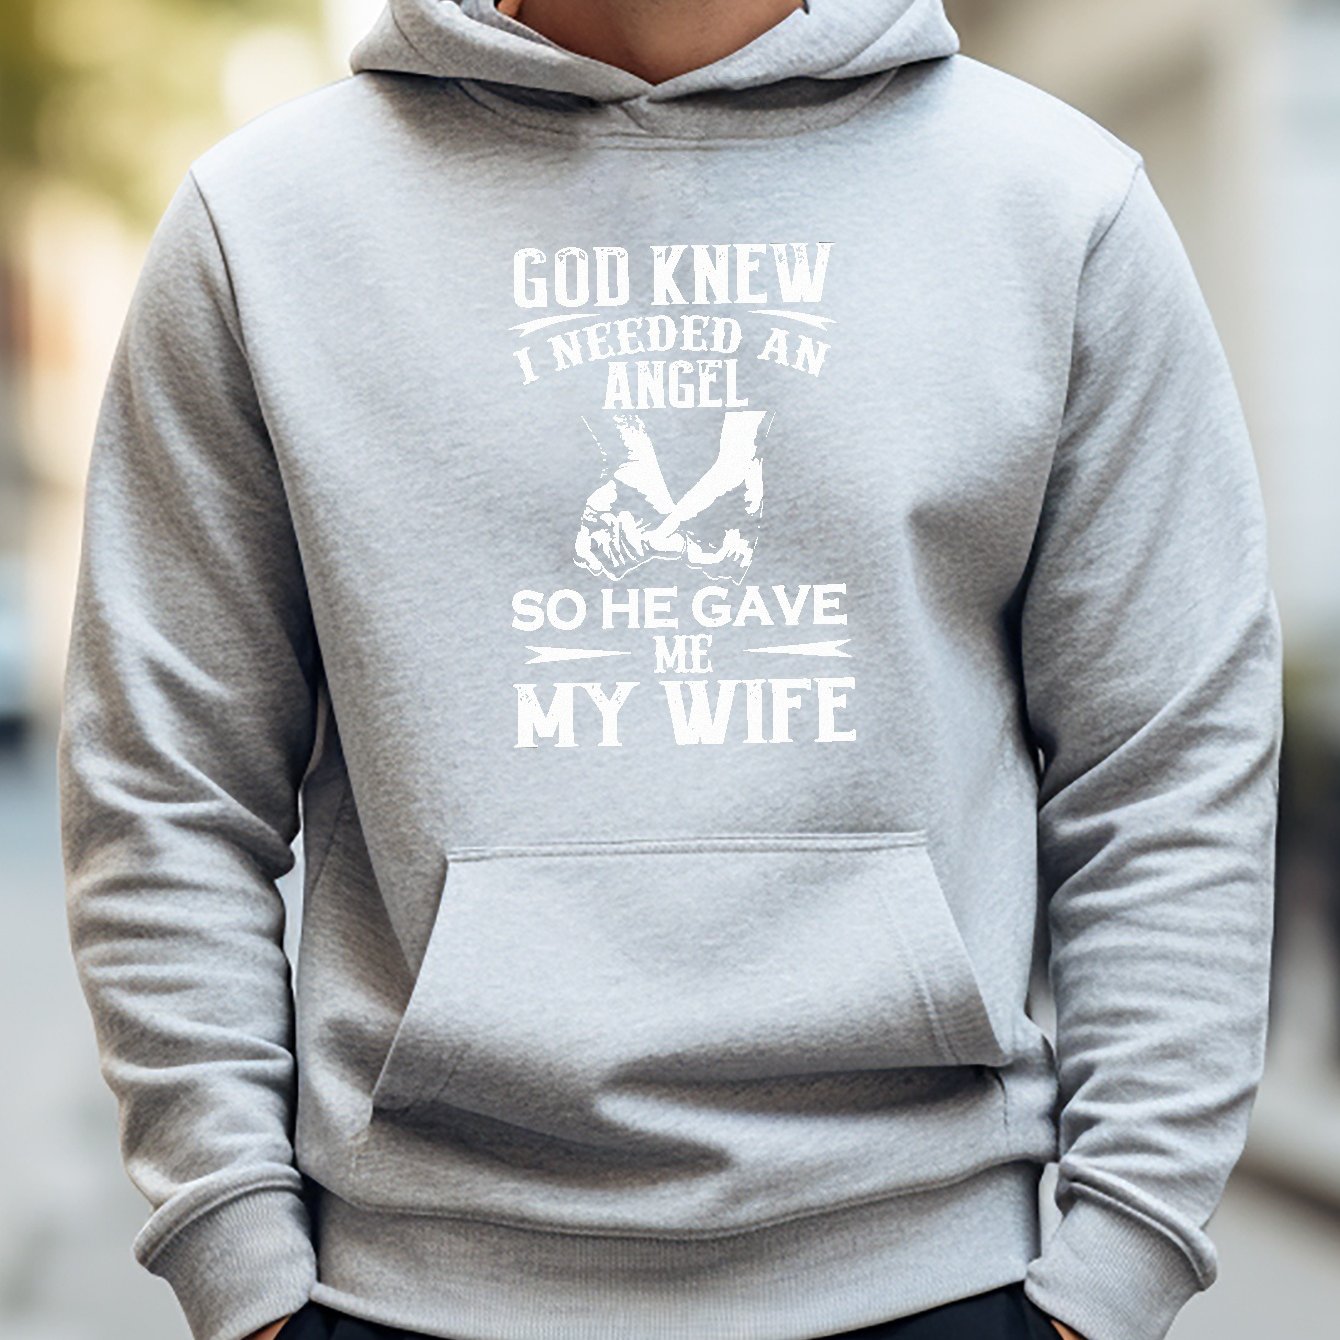 GOD KNEW I NEEDED AN ANGEL SO HE GAVE ME MY WIFE MEN'S CHRISTIAN PULLOVER HOODED SWEATSHIRT claimedbygoddesigns